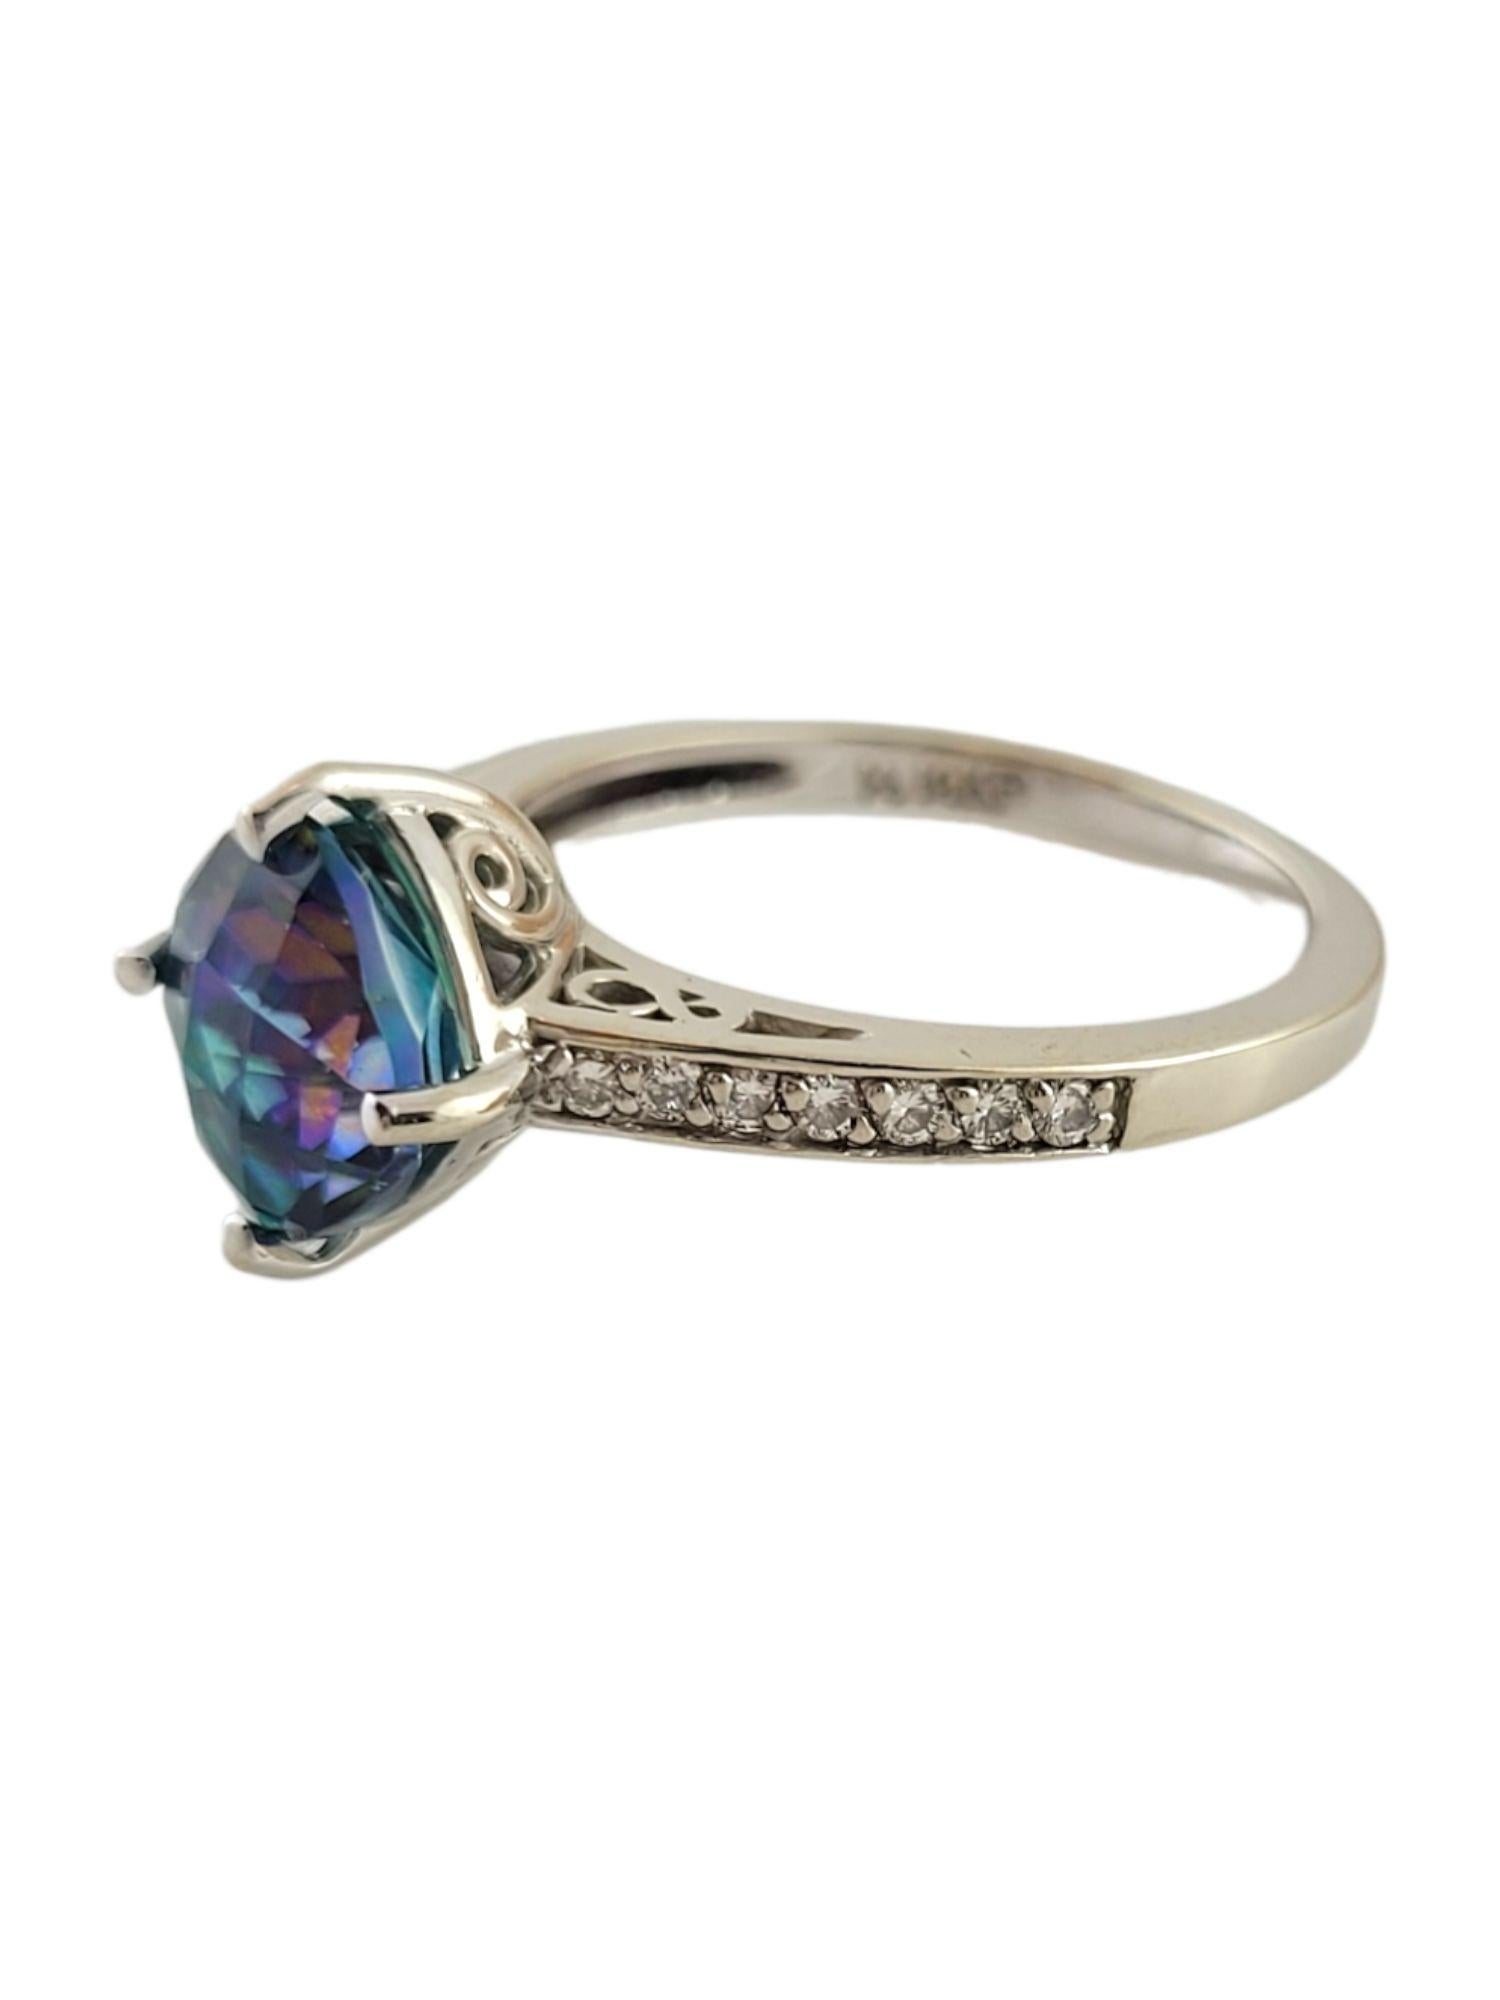 Gorgeous square mystic topaz stone and 14 sparkling, round cut diamonds set in a 14K white gold ring!

Approximate total diamond weight: .15 cttw

Diamond clarity: SI2-I1

Diamond color: I-J

2.88ct Mystic Topaz - color created by coating.

Square